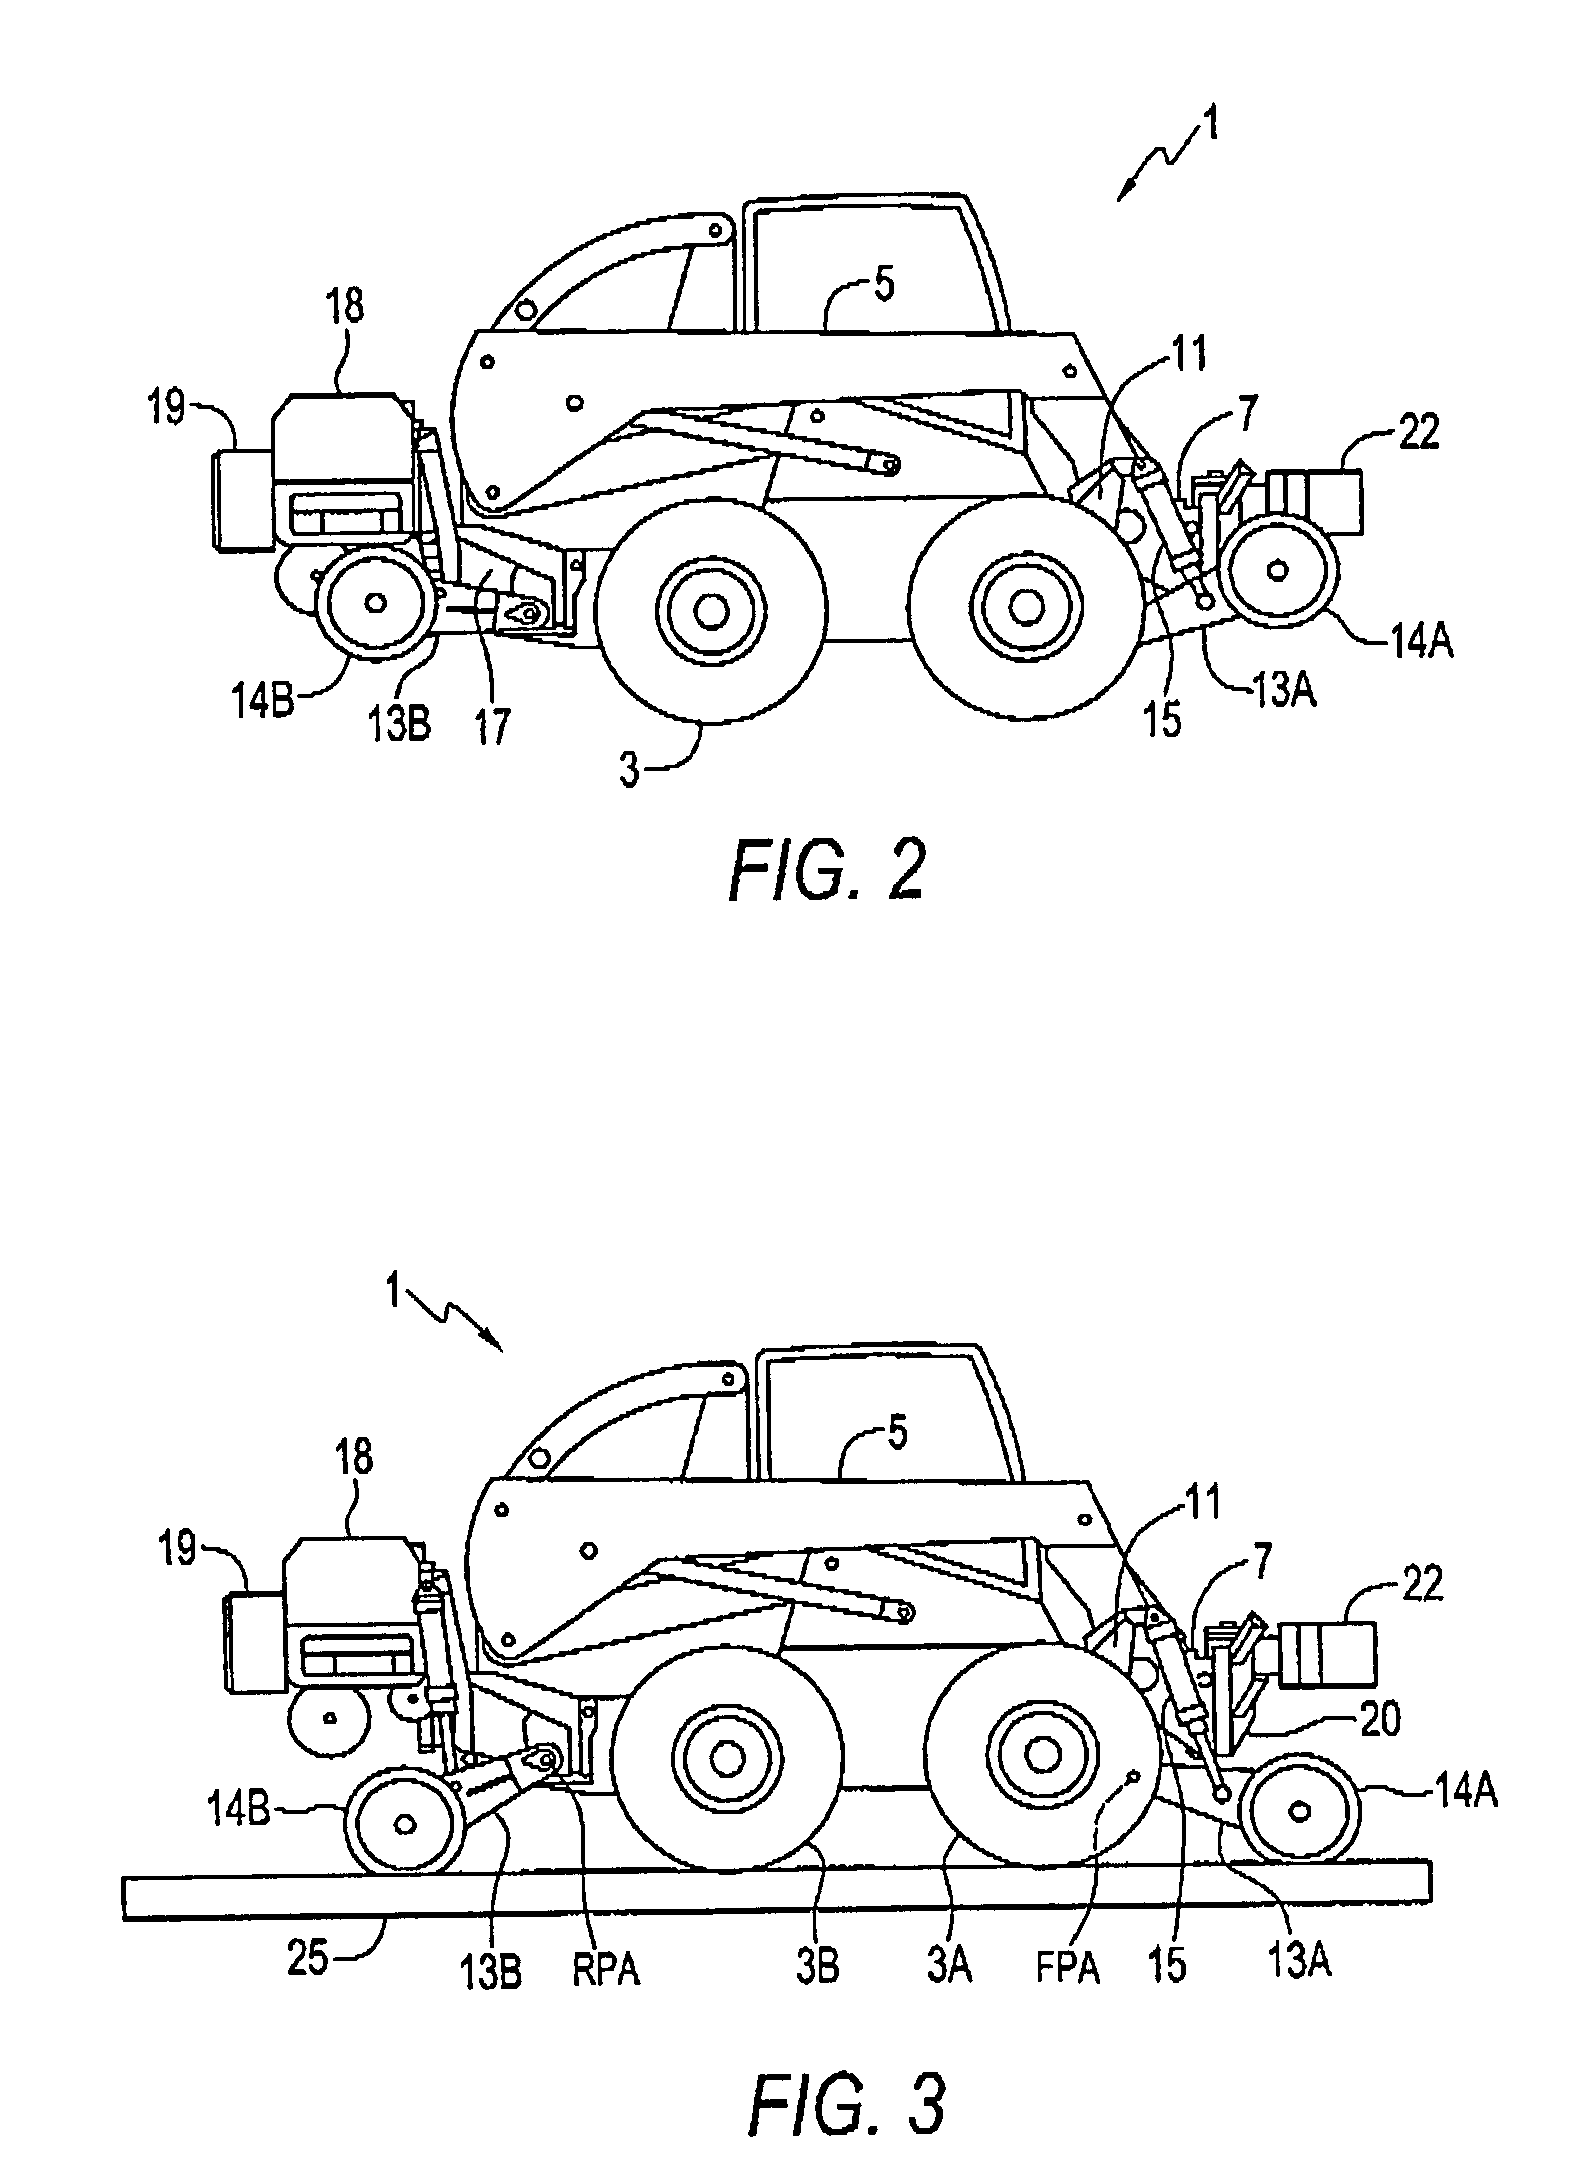 Rail car mover apparatus for loader vehicle